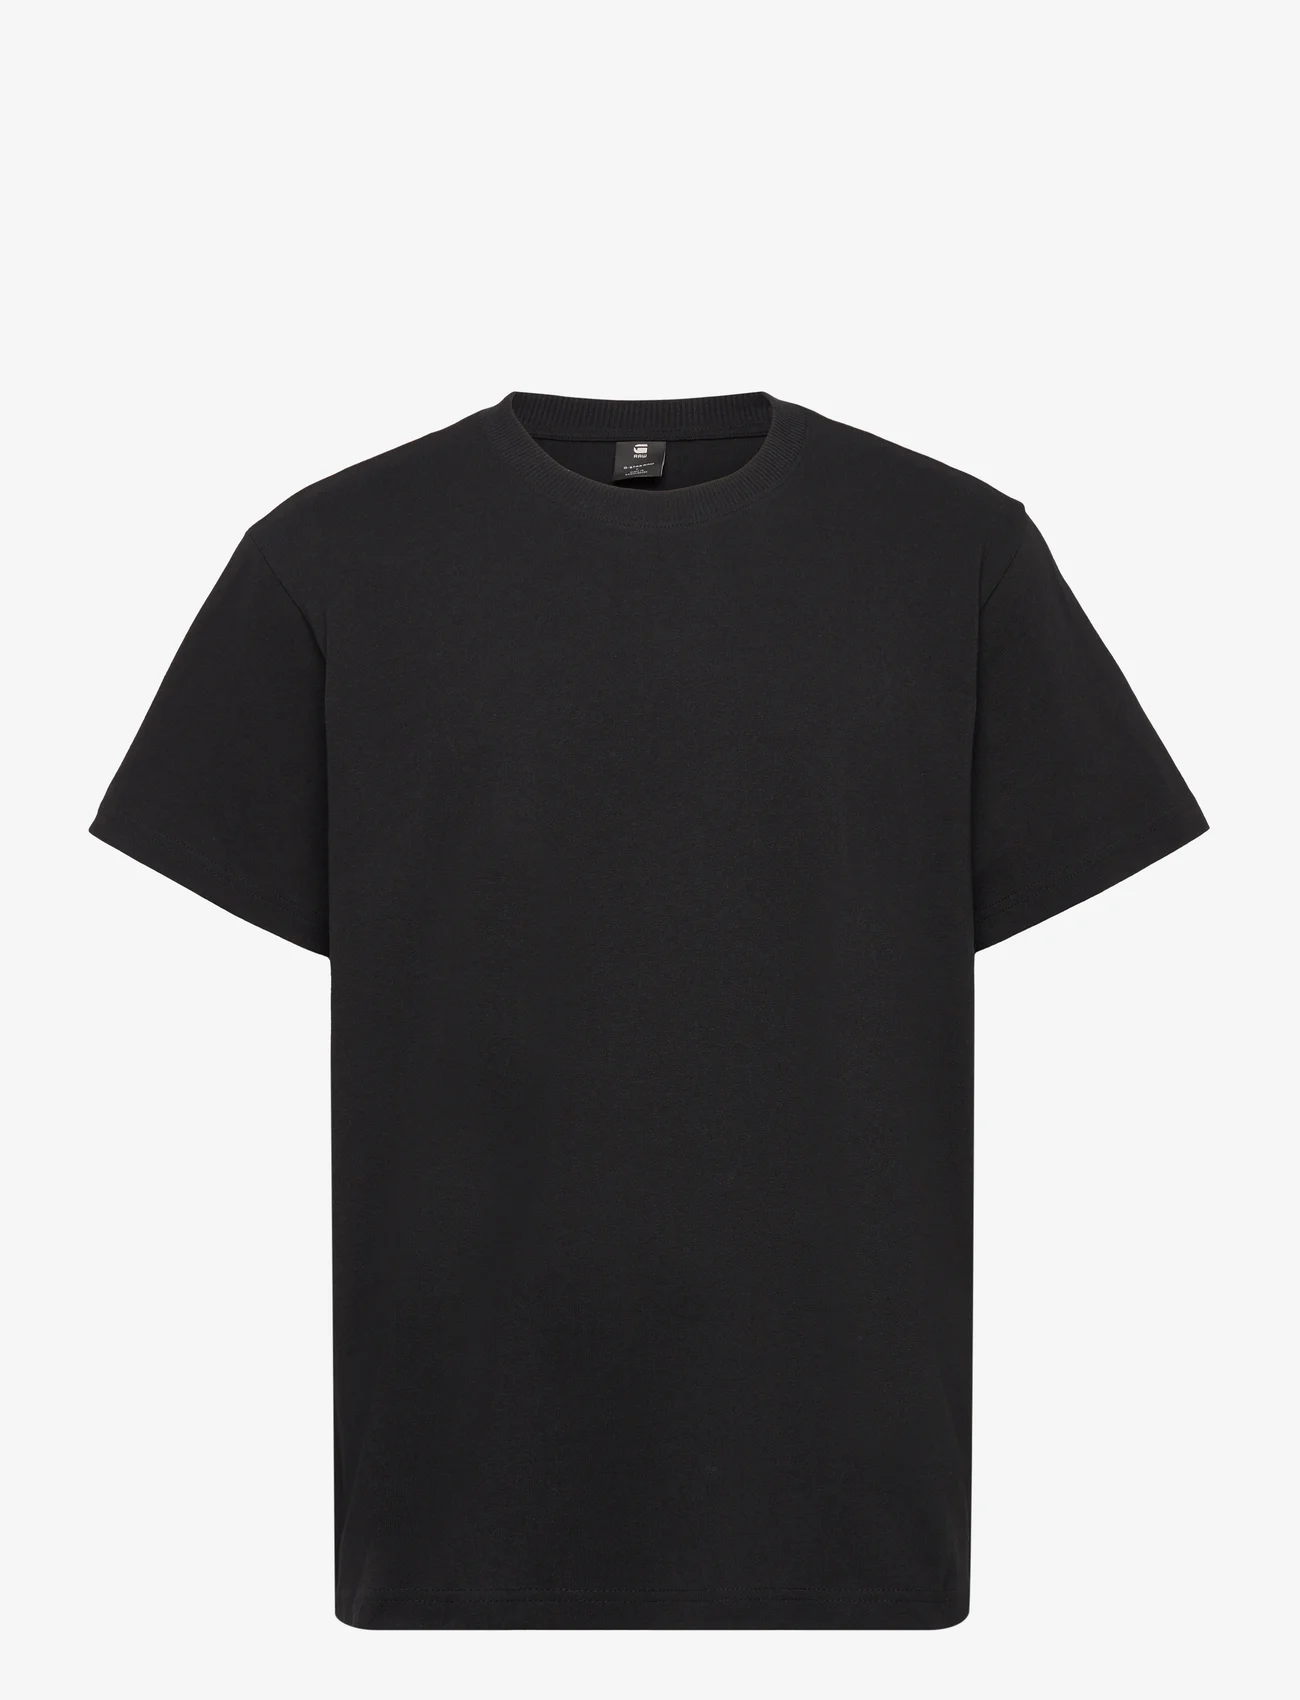 G-Star RAW - Loose r t s\s - lowest prices - dk black - 0